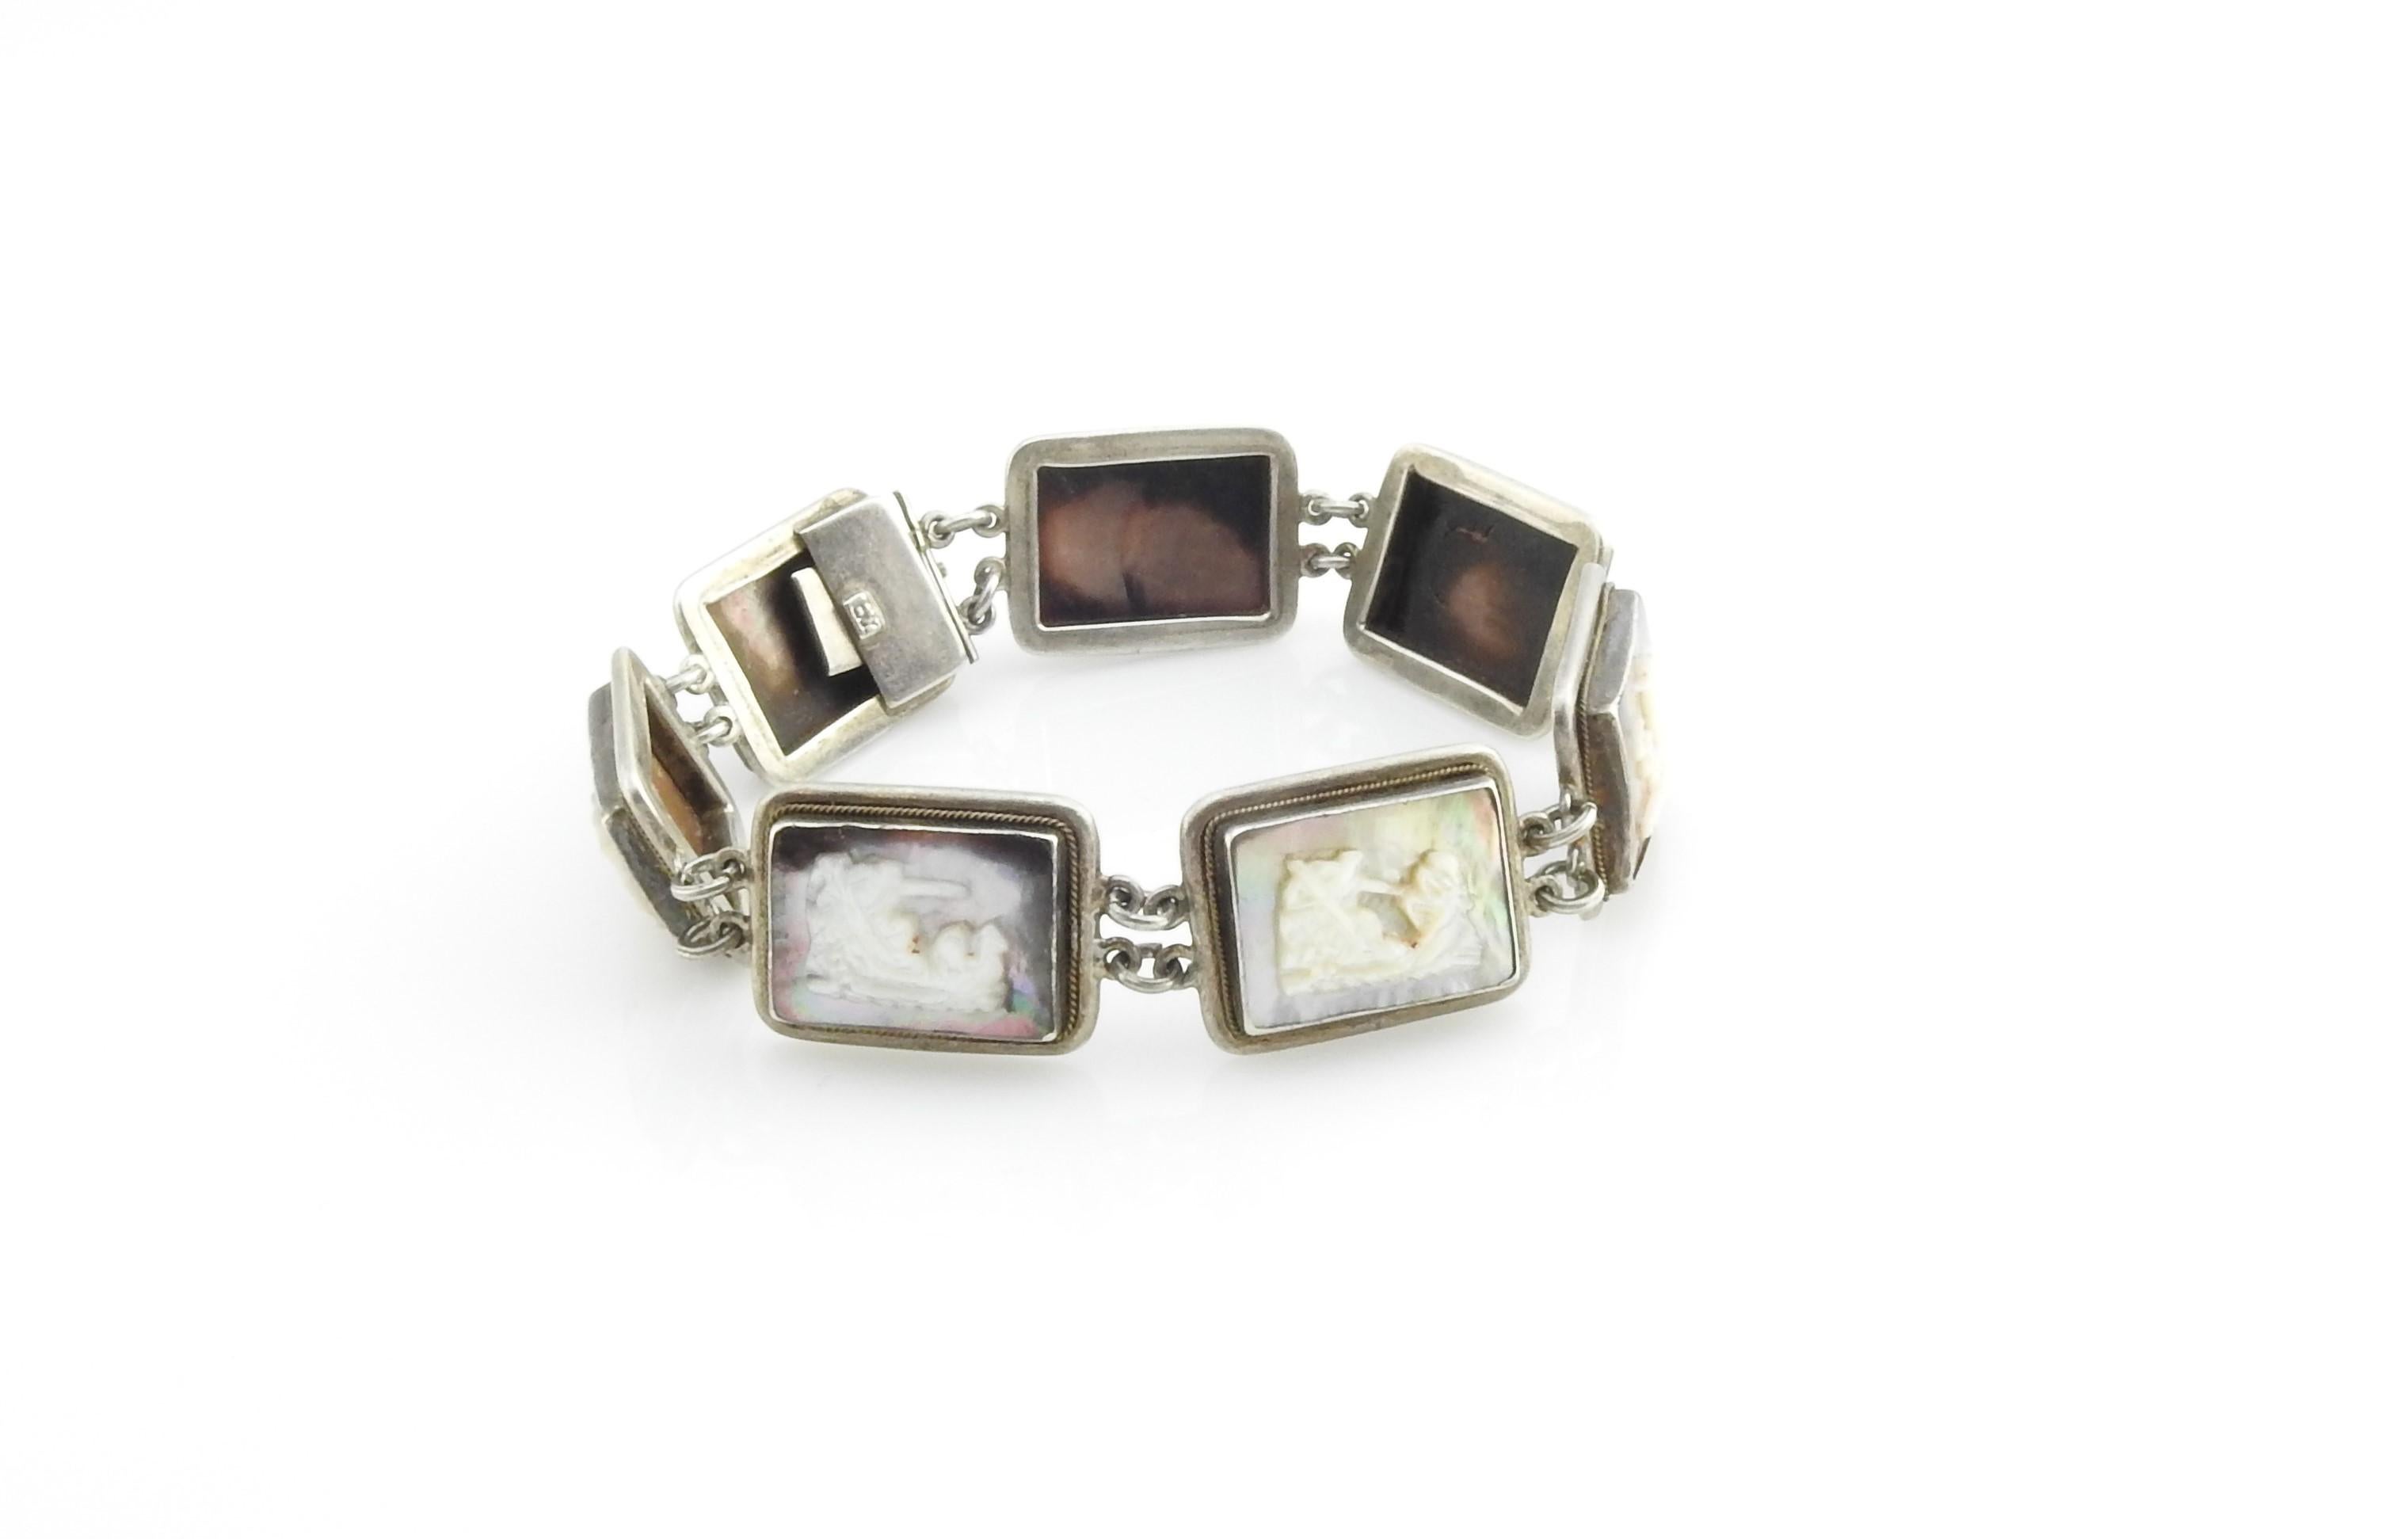 900 Sterling Silver Mother of Pearl and Abalone Bracelet-

Each link on this stunning sterling silver bracelet features a chariot motif in carved mother-of pearl and abalone shell.

Size:  7.5 inches

Weight: 23.0 dwt. / 35.8  gr. 

Tested for 900